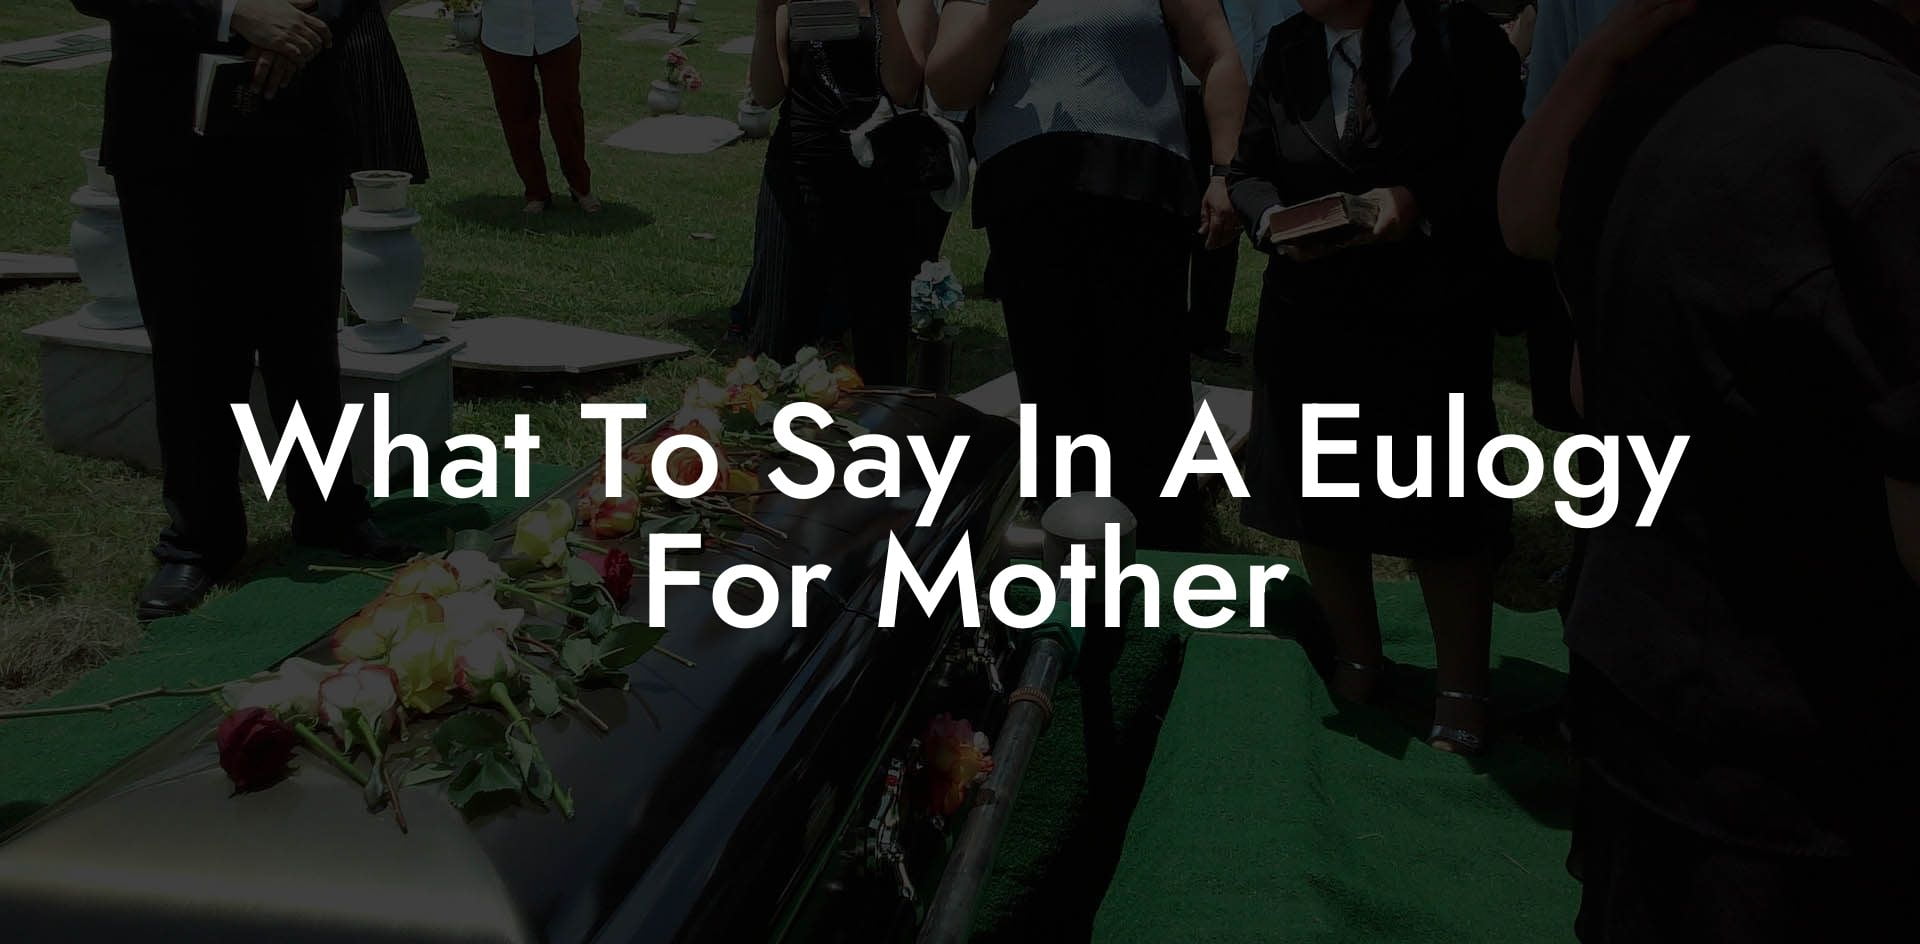 What To Say In A Eulogy For Mother